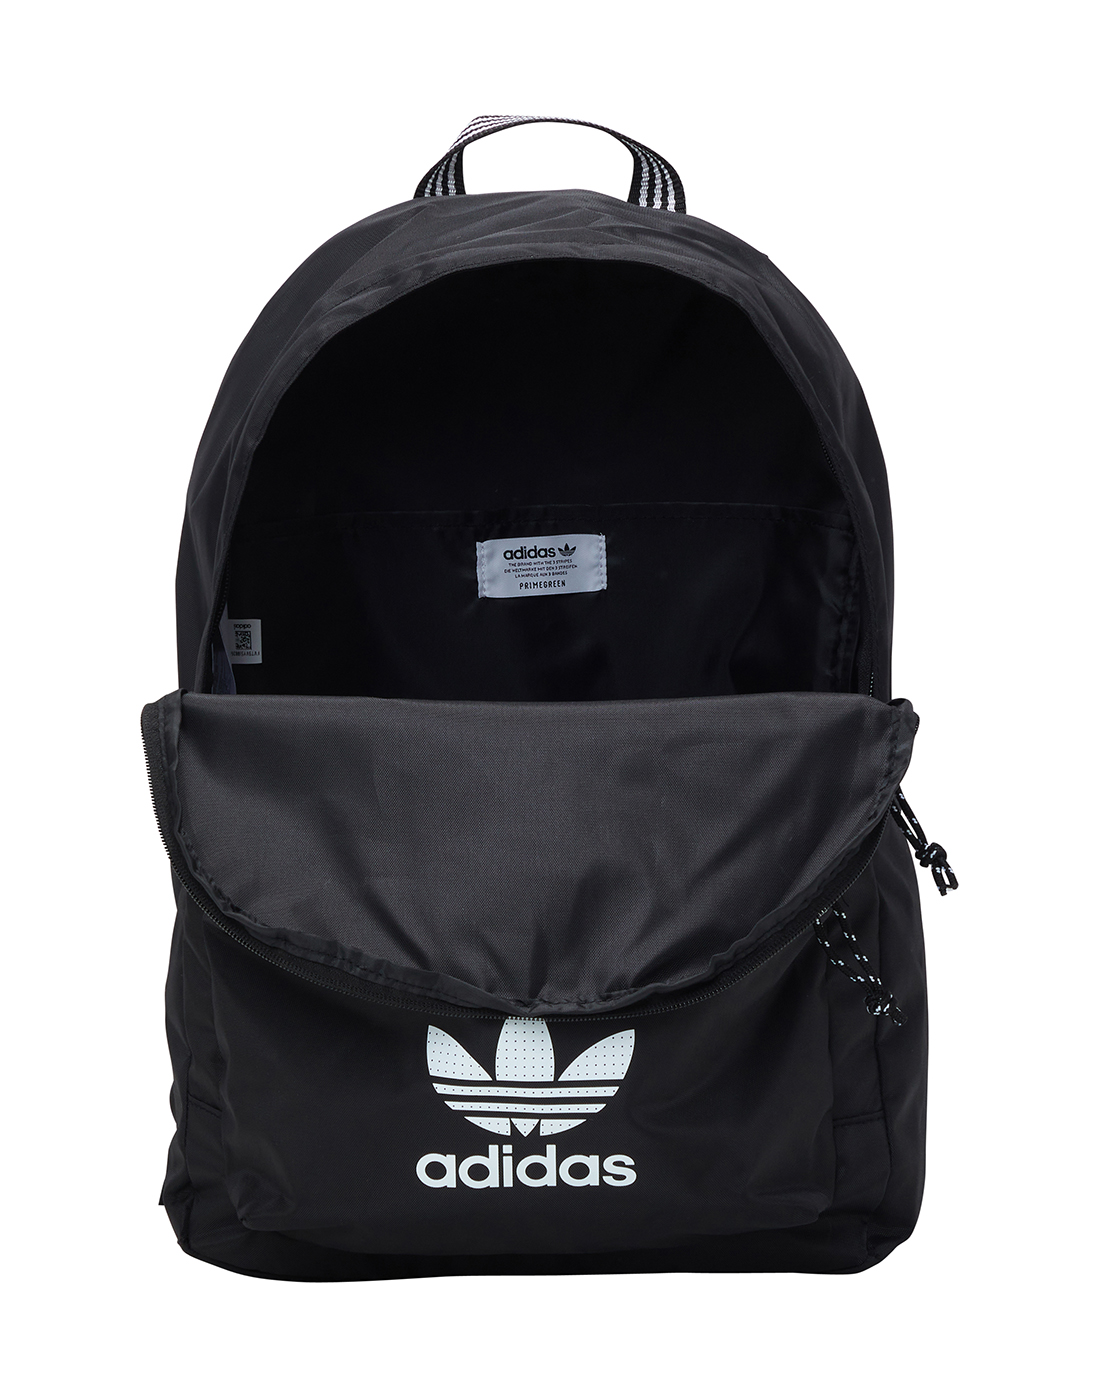 adidas Originals 3-Stripe Backpack - Black | Life Style Sports IE